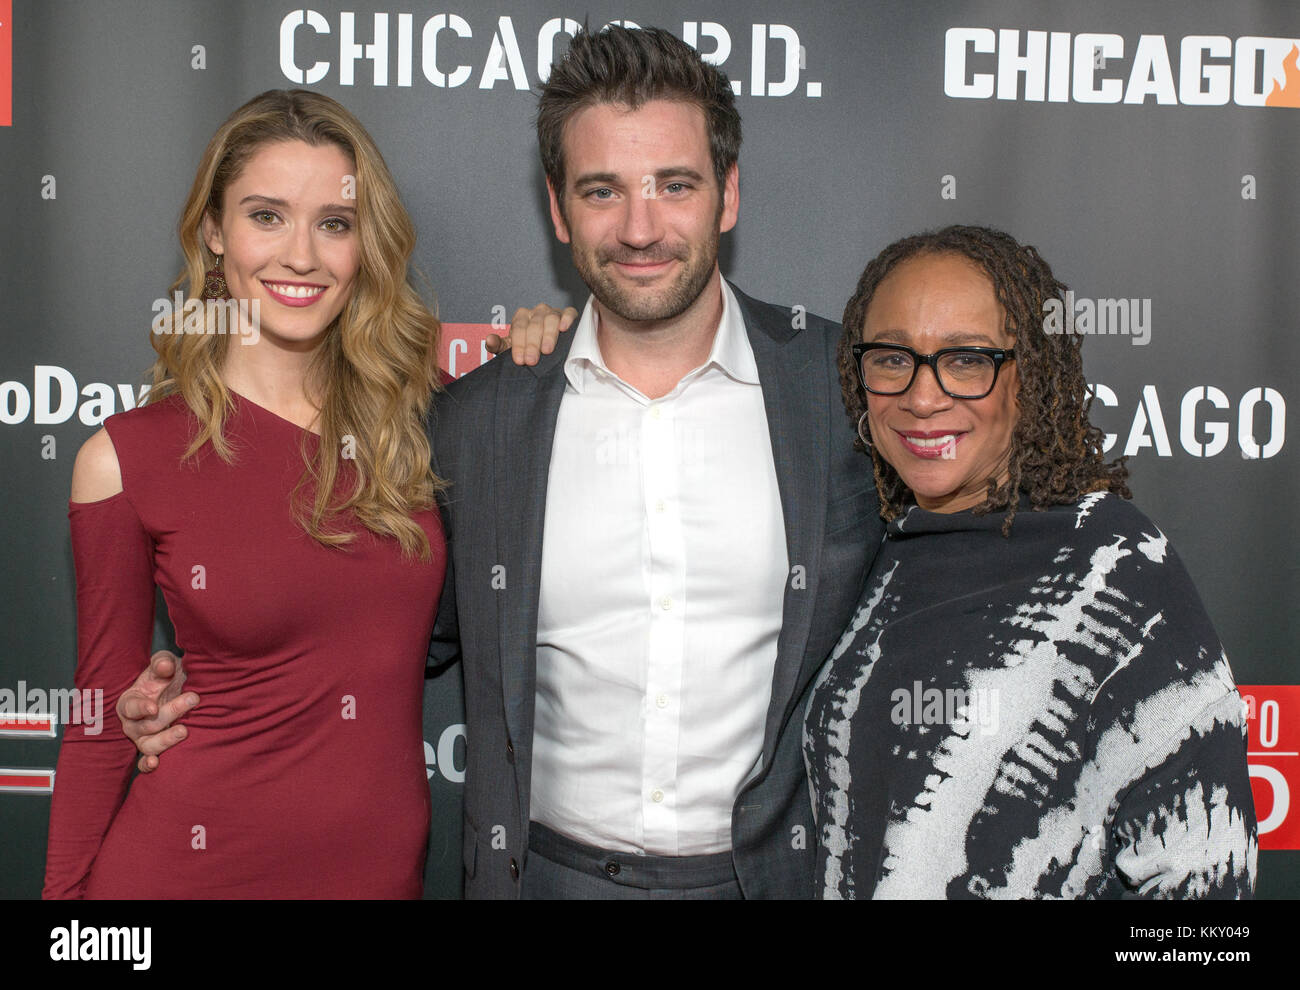 3rd annual NBC One Chicago Party featuring cast members from Chicago Fire, Chicago Med and Chicago P.D - Arrivals  Featuring: Norma Kuhling, Colin Donnell, S. Epatha Merkerson Where: Chicago, Illinois, United States When: 30 Oct 2017 Credit: WENN Stock Photo